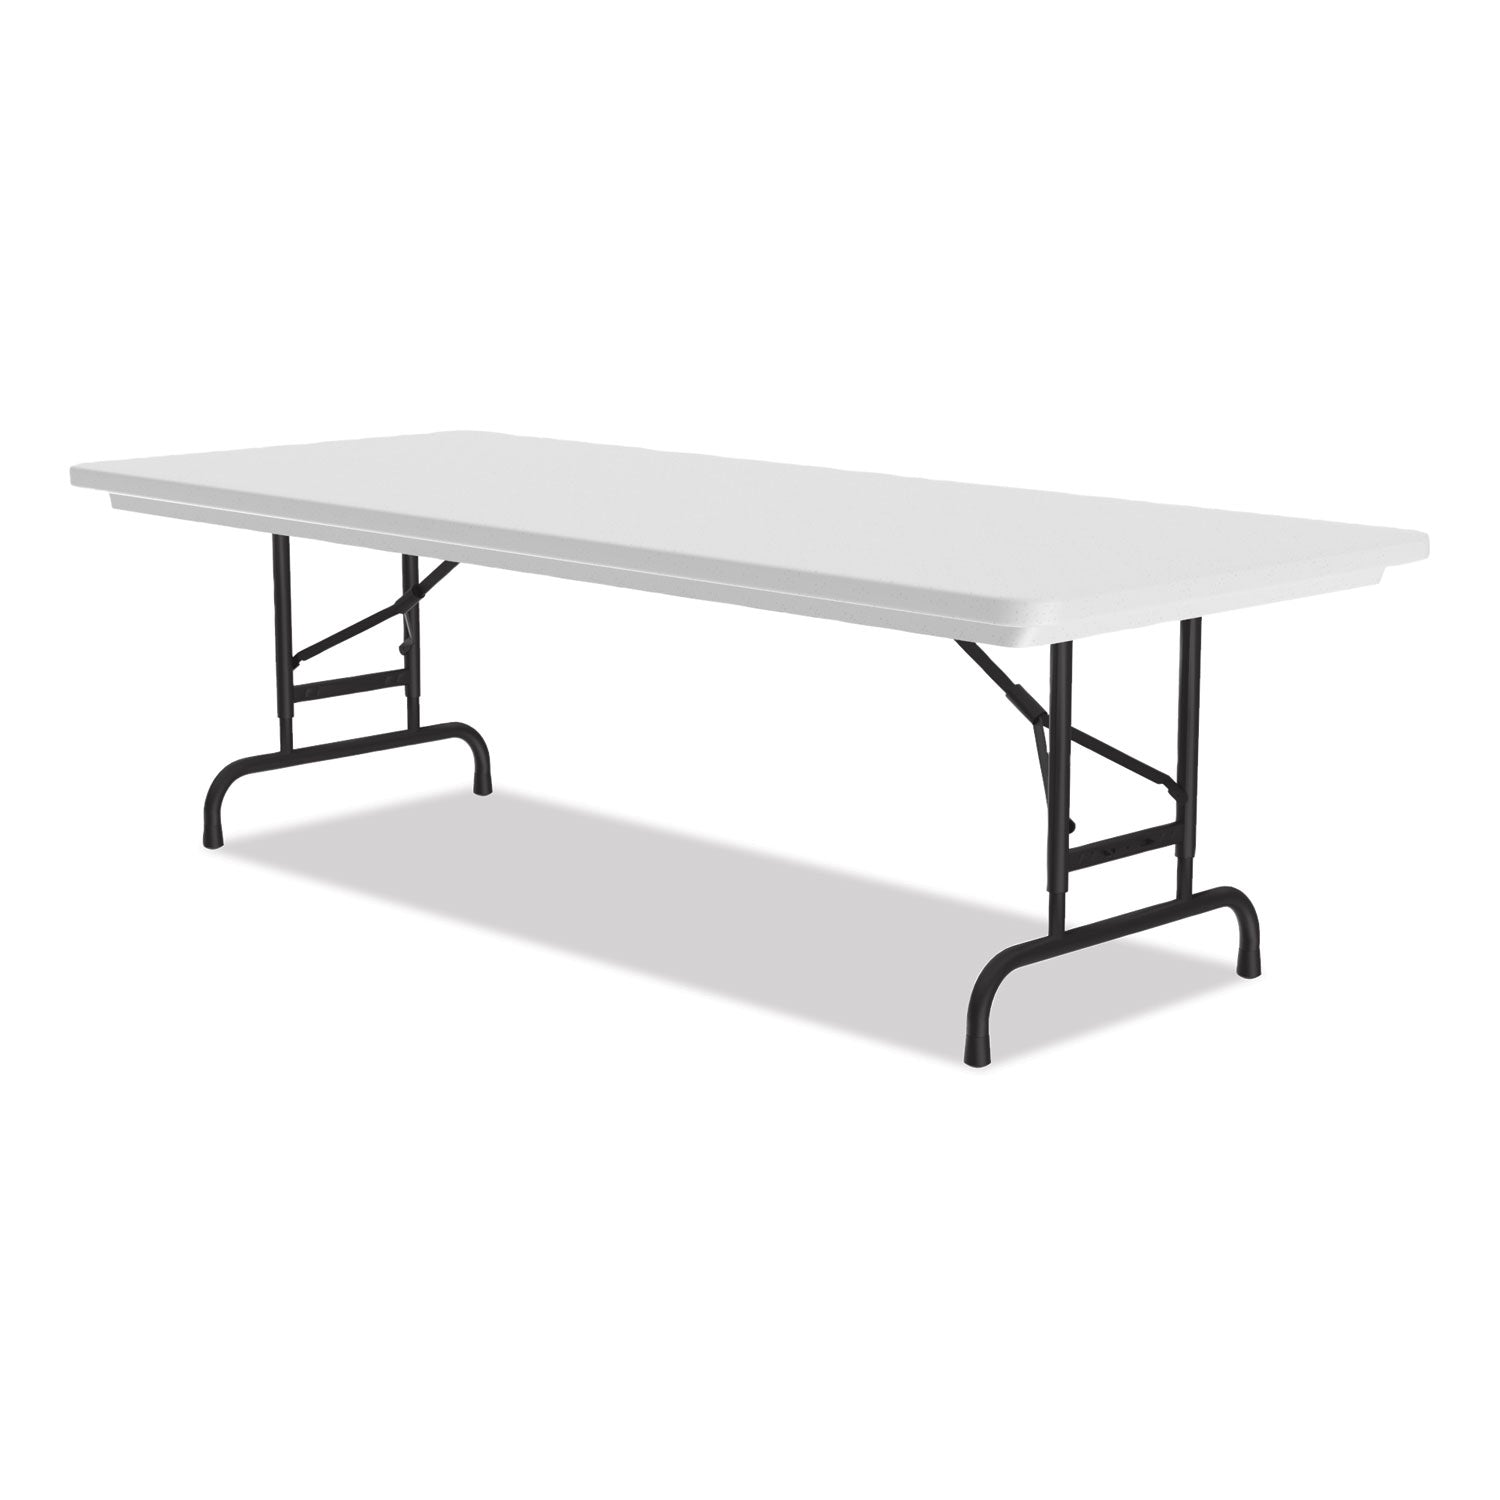 adjustable-folding-tables-rectangular-96-x-30-x-22-to-32-gray-top-black-legs-4-pallet-ships-in-4-6-business-days_crlra3096234p - 2